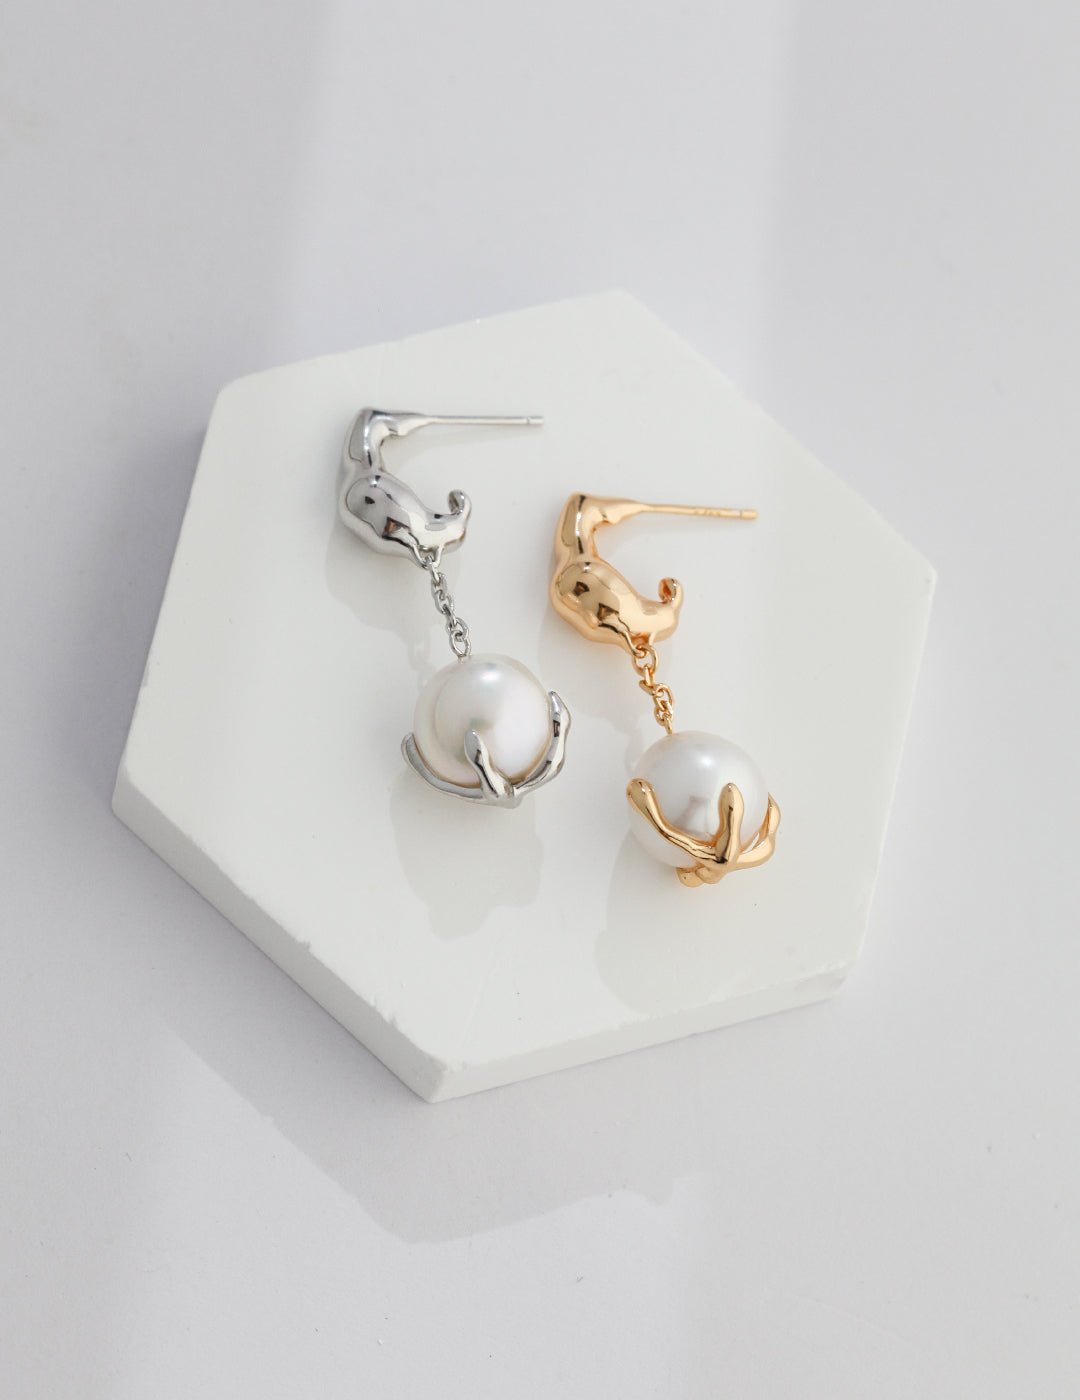 Nature inspired pearl earrings dangle in silver and gold